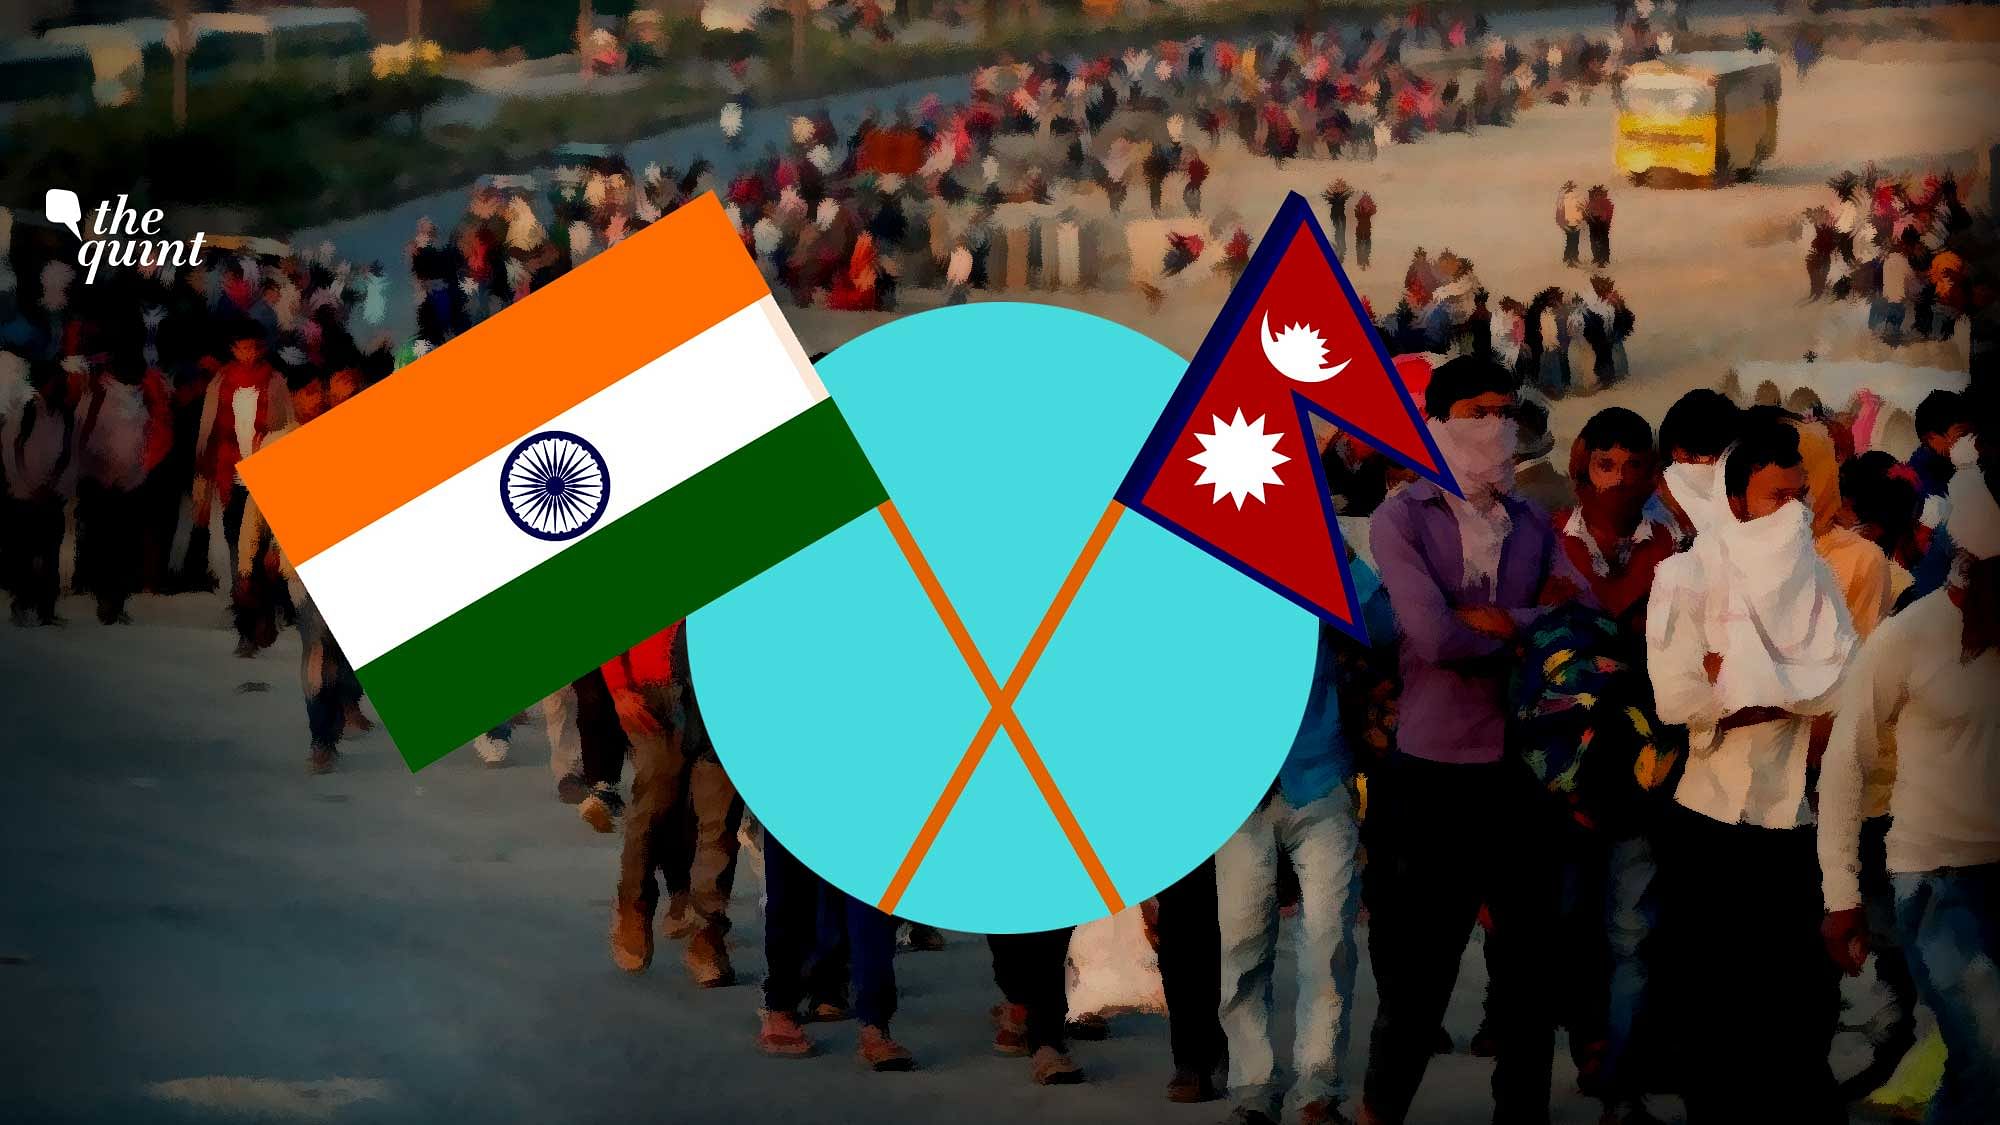 A file image of exodus of migrant workers, and Nepal and India’s flags (R and L), used for representational purposes only.